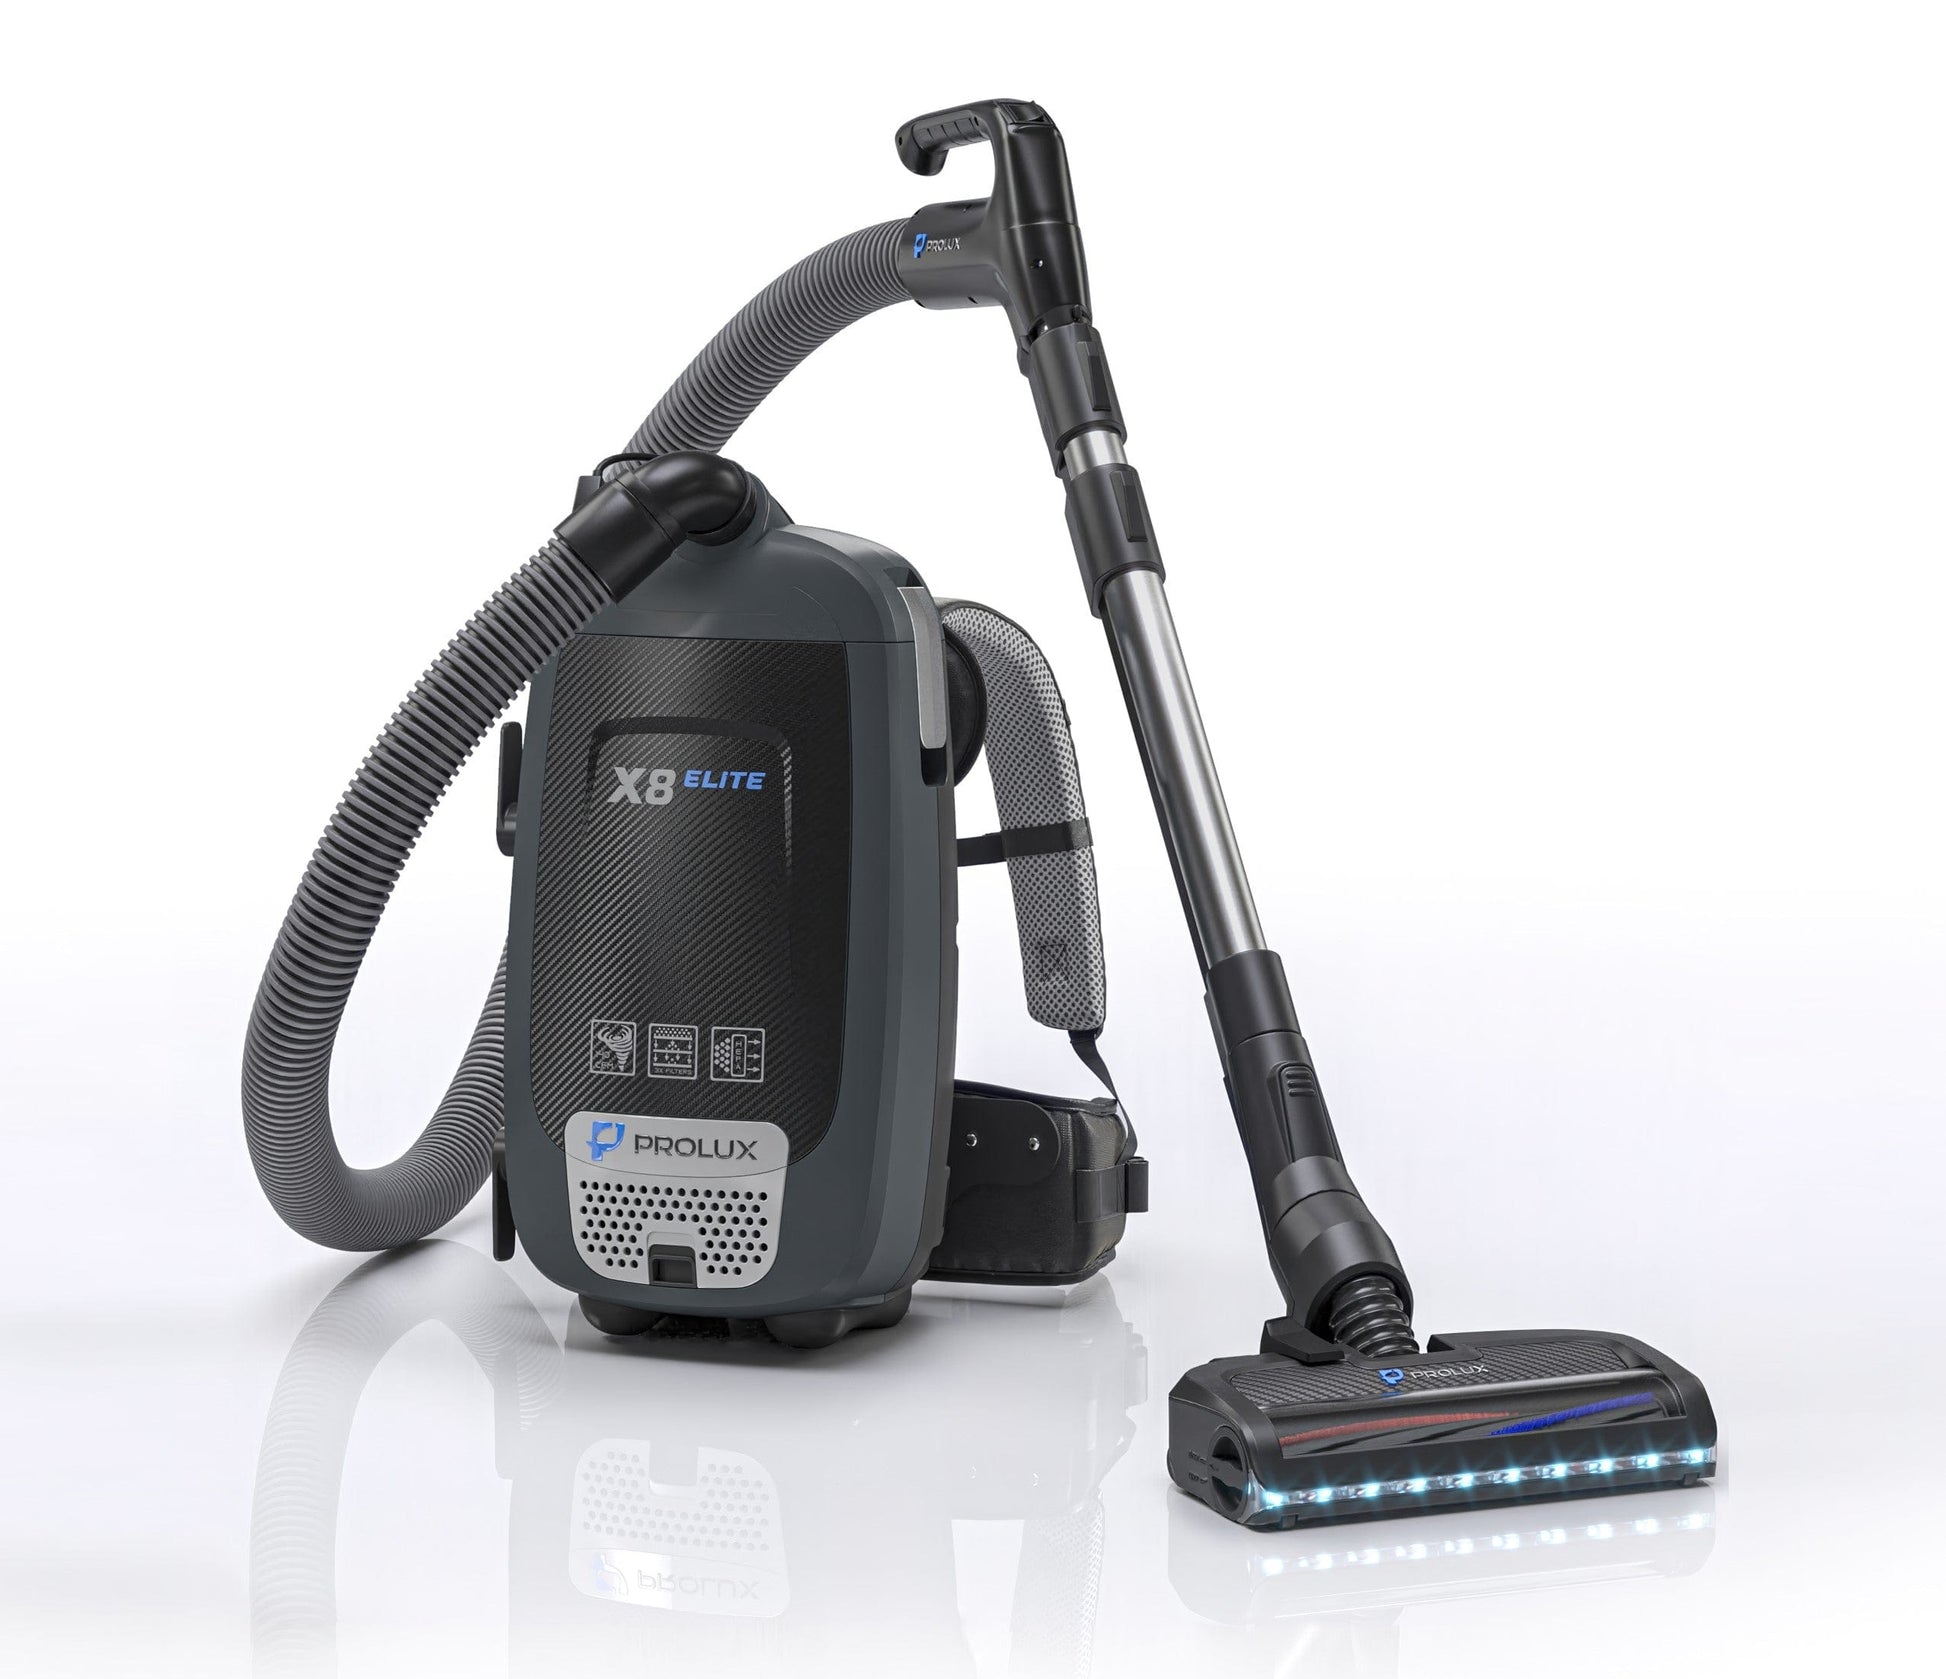 Prolux X8 Elite Backpack Vacuum Canister Cleaners